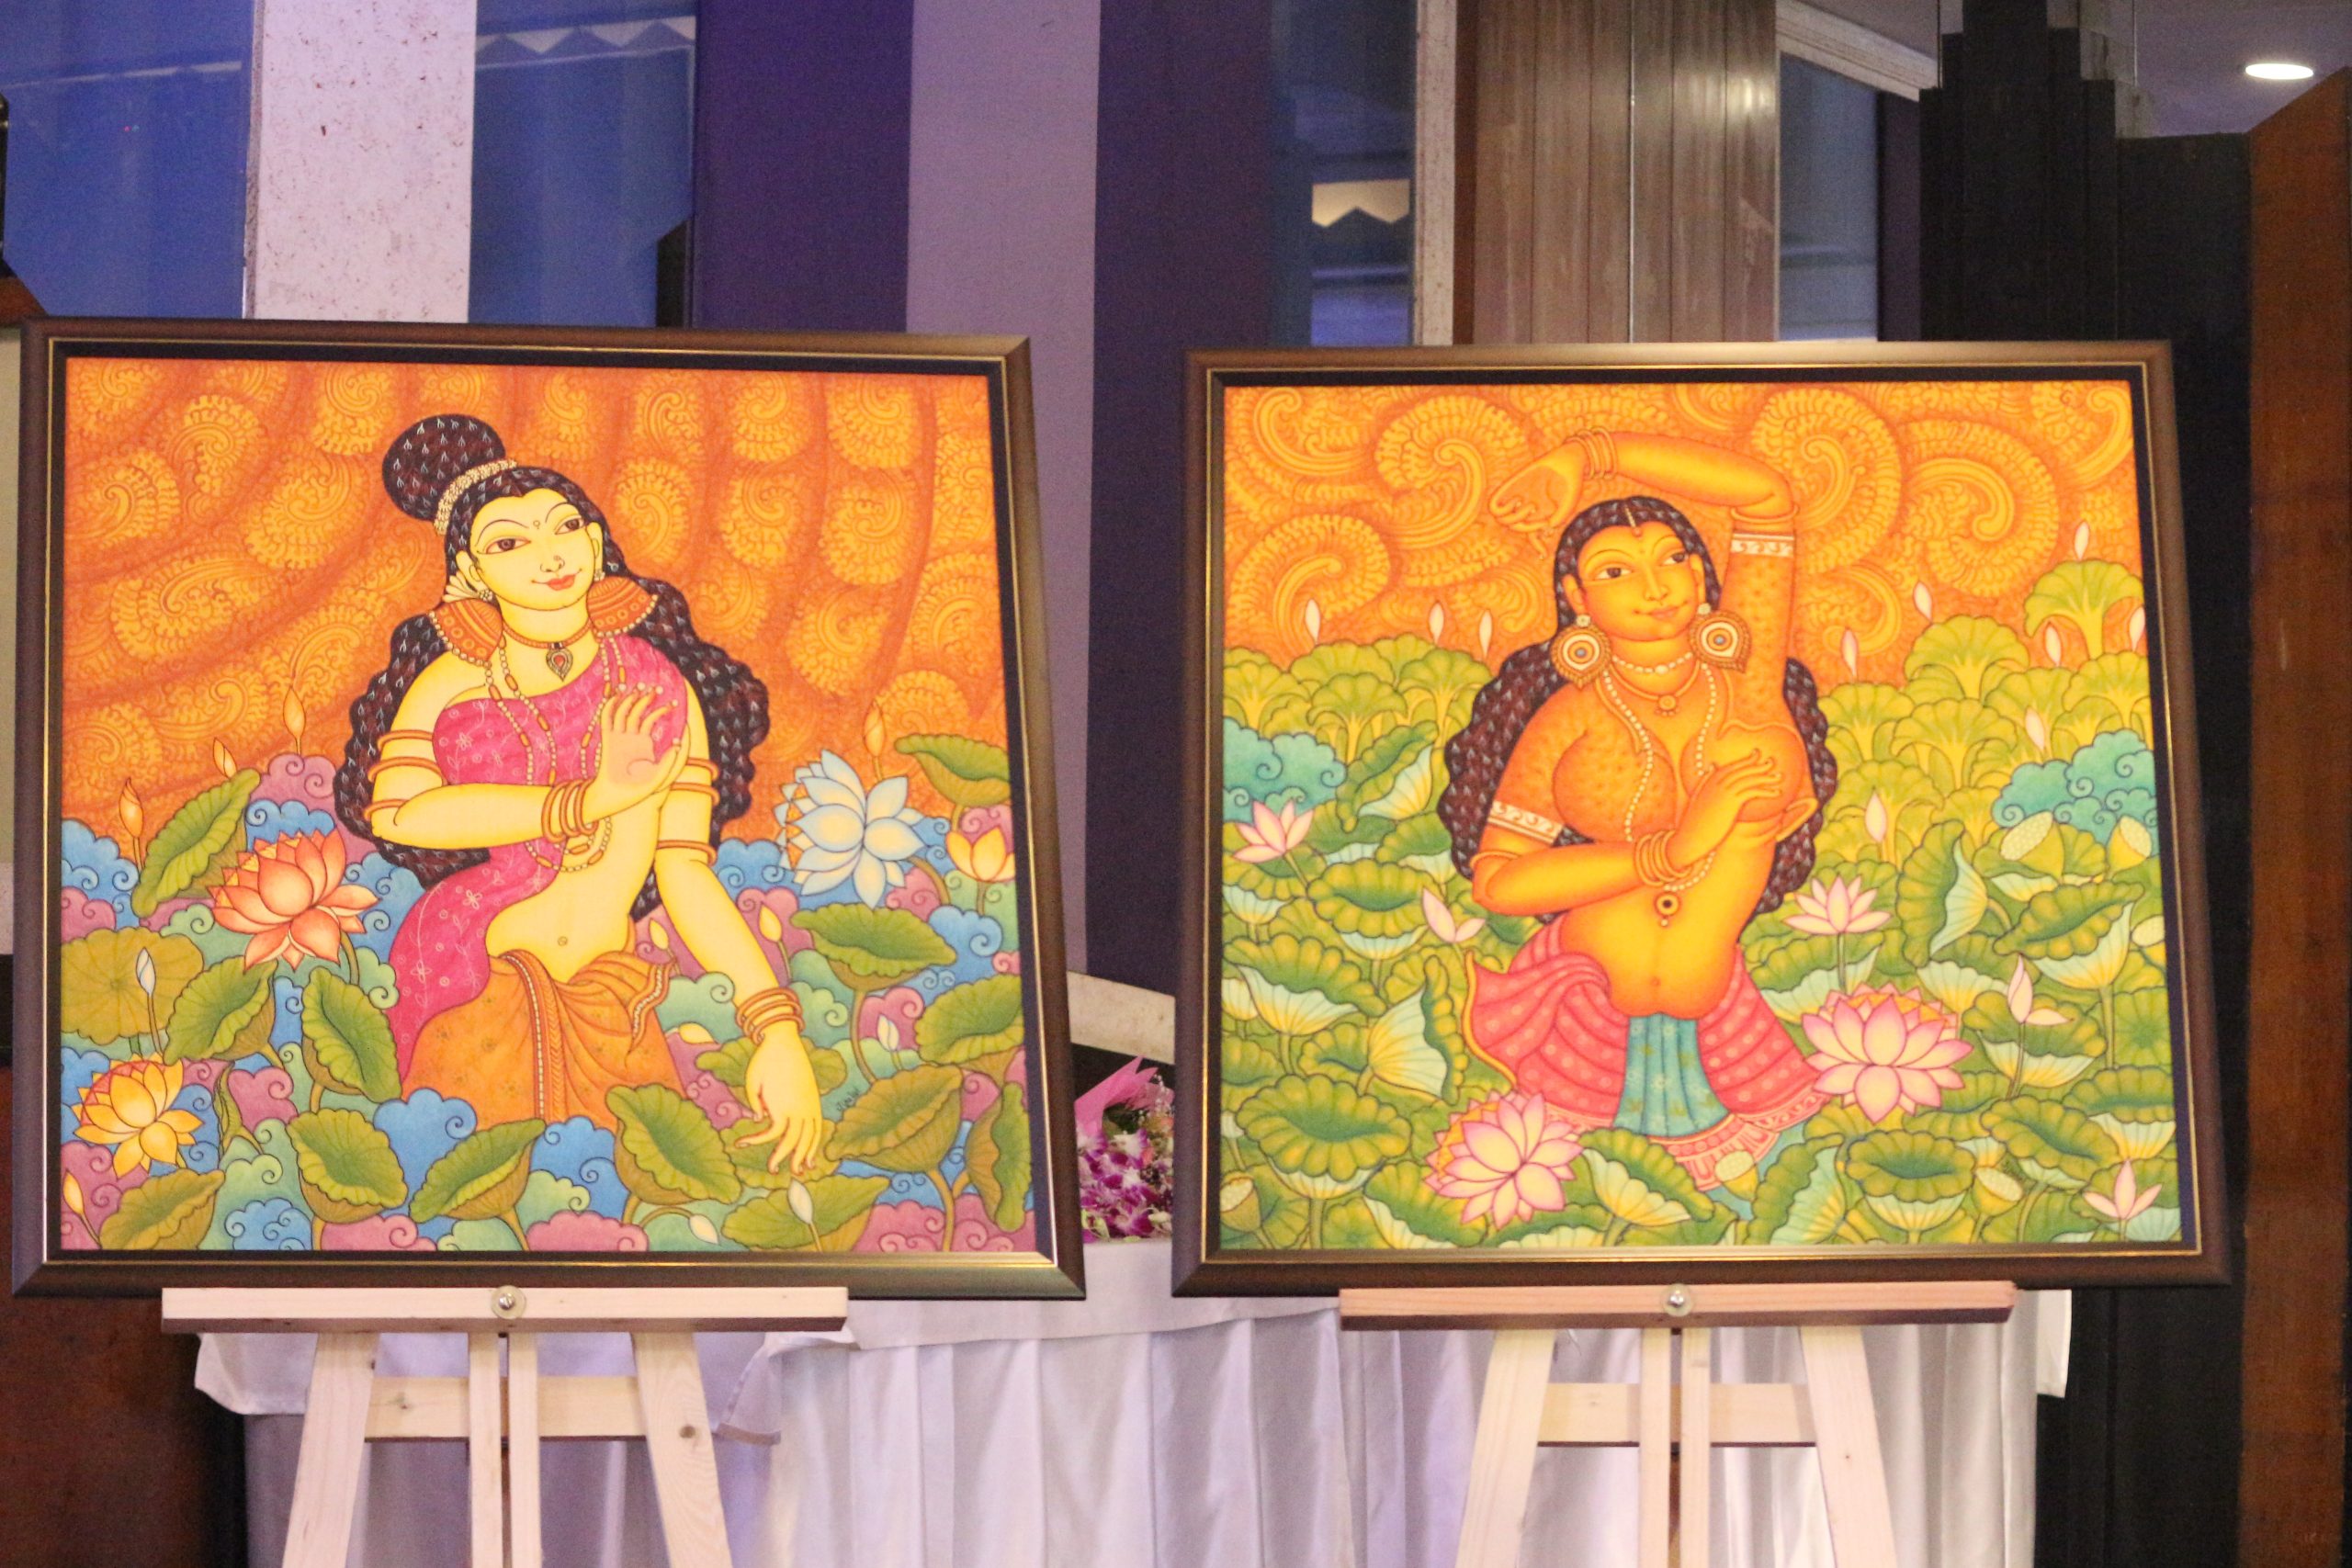 Apollo Cancer Centres launches "ArtCan" to raise awareness about Breast Cancer